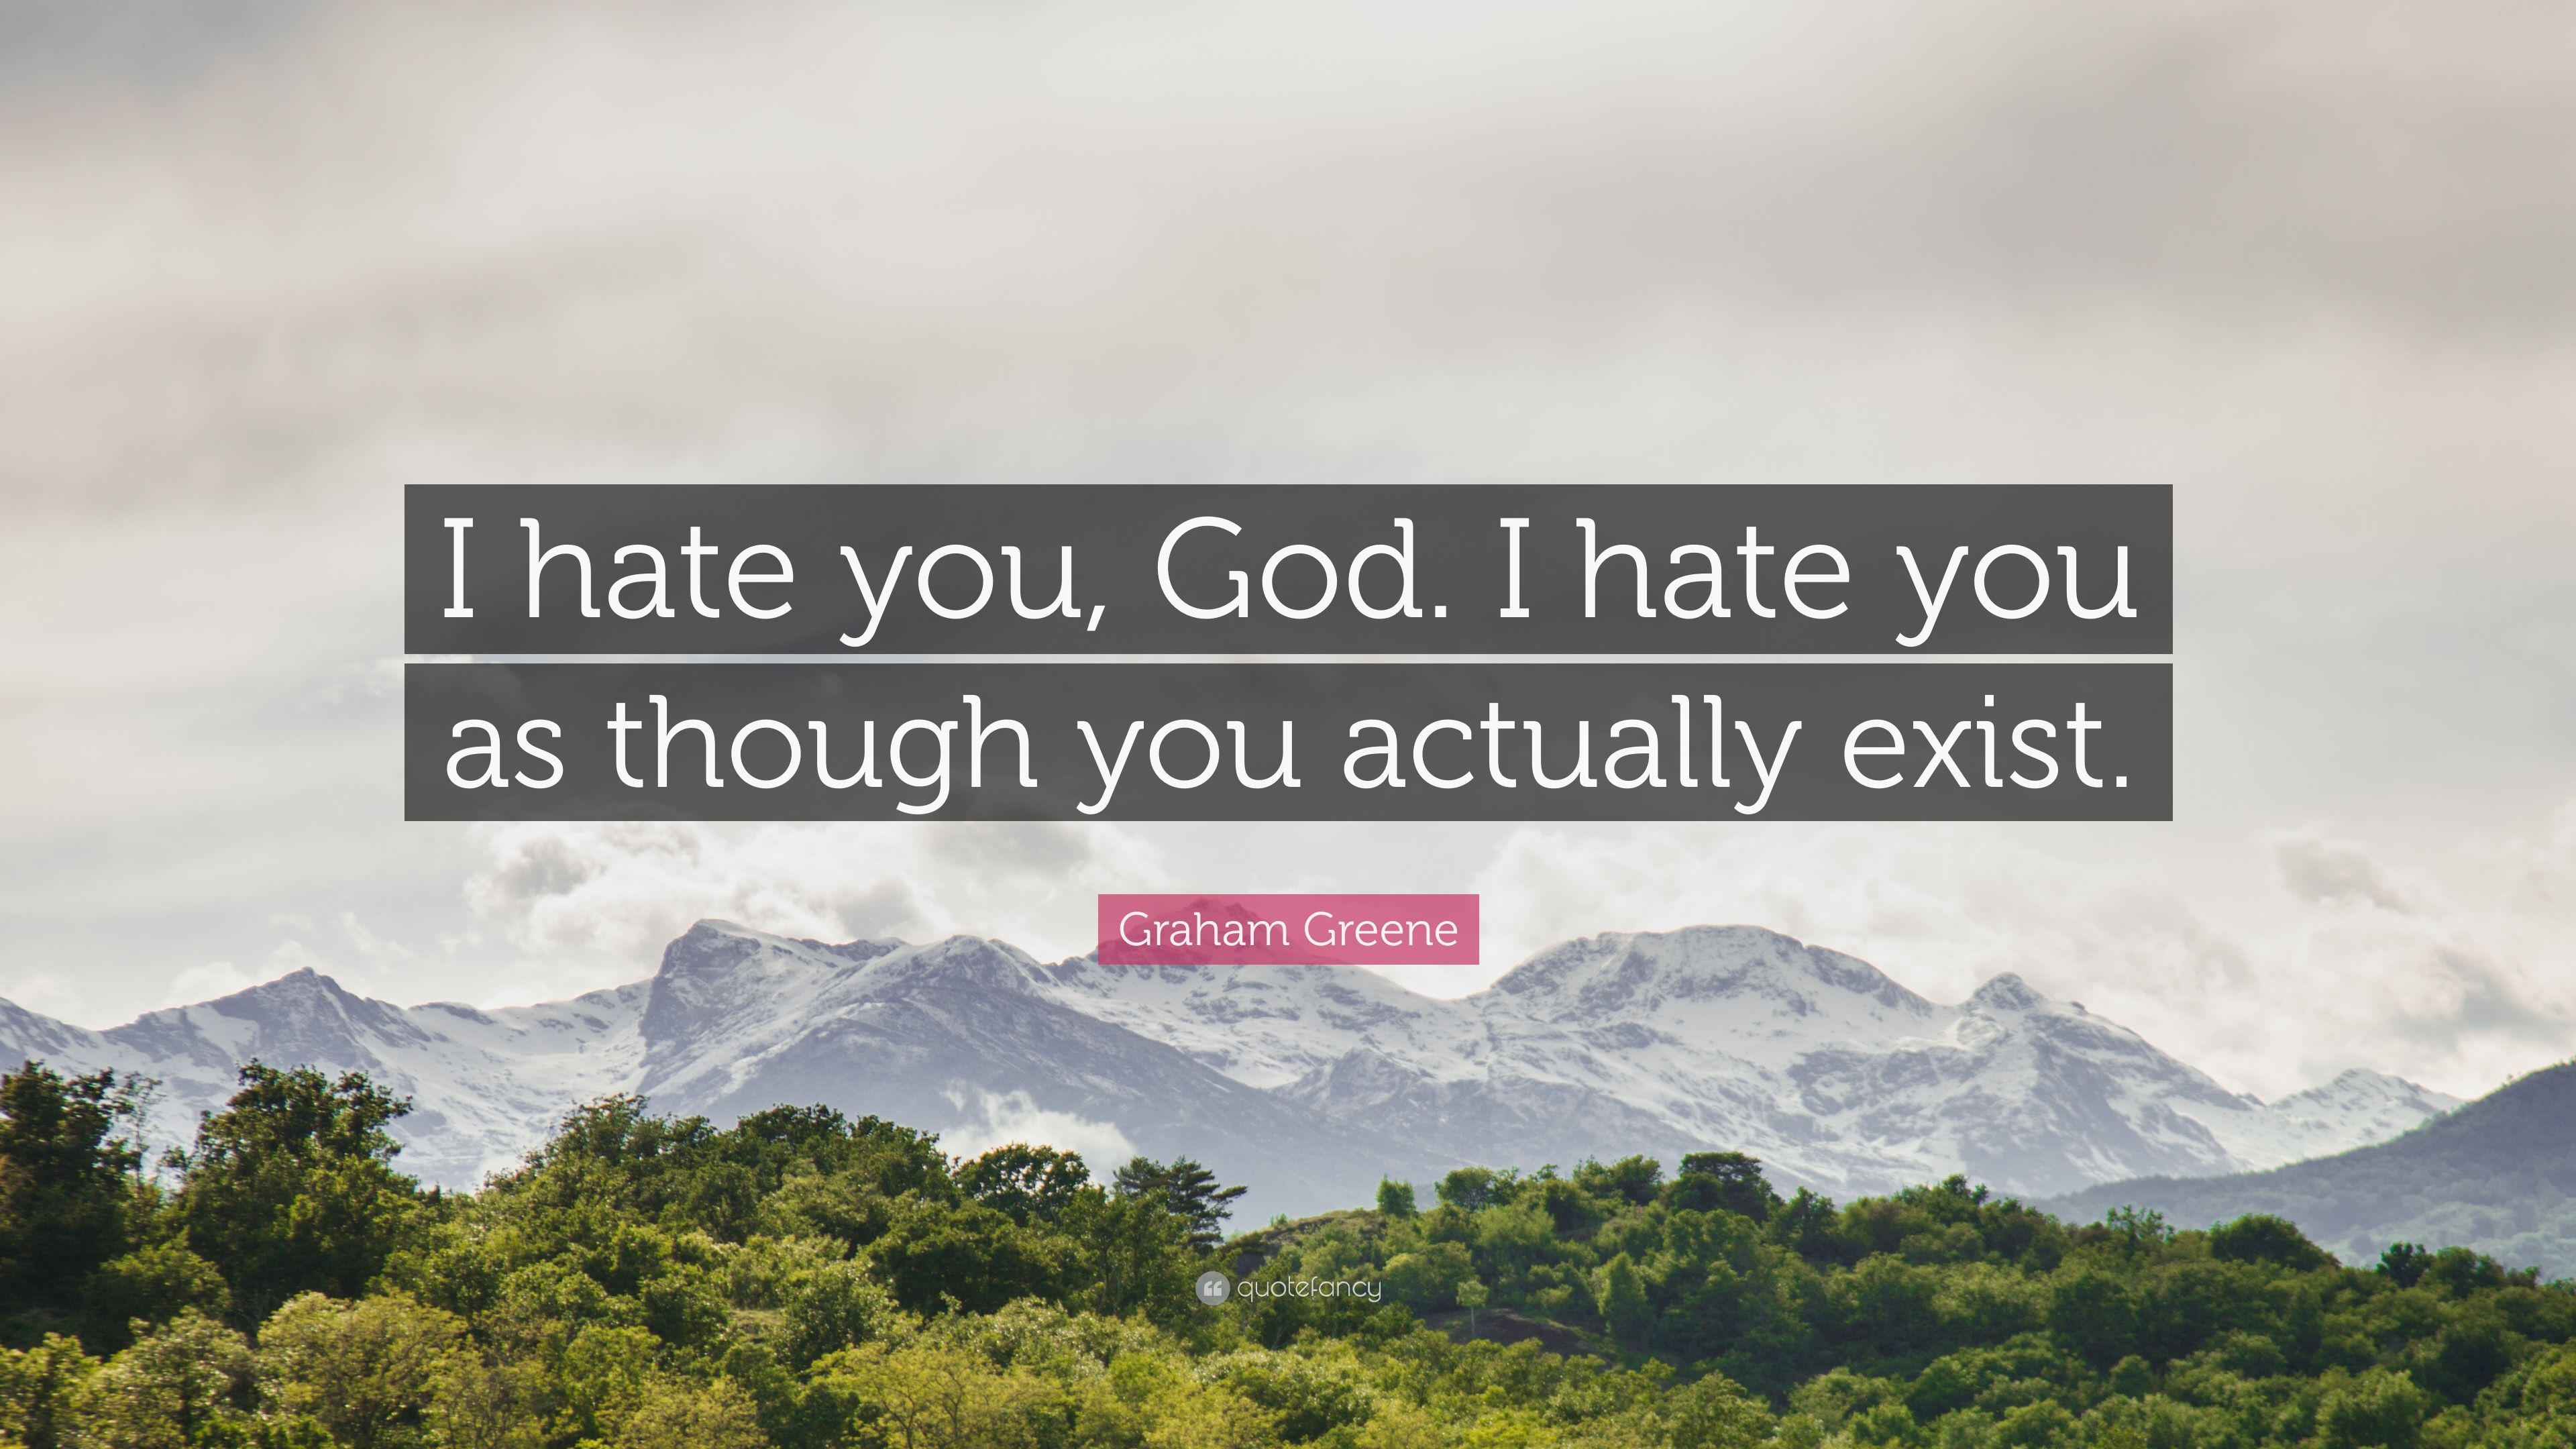 Graham Greene Quote: “I hate you, God. I hate you as though you